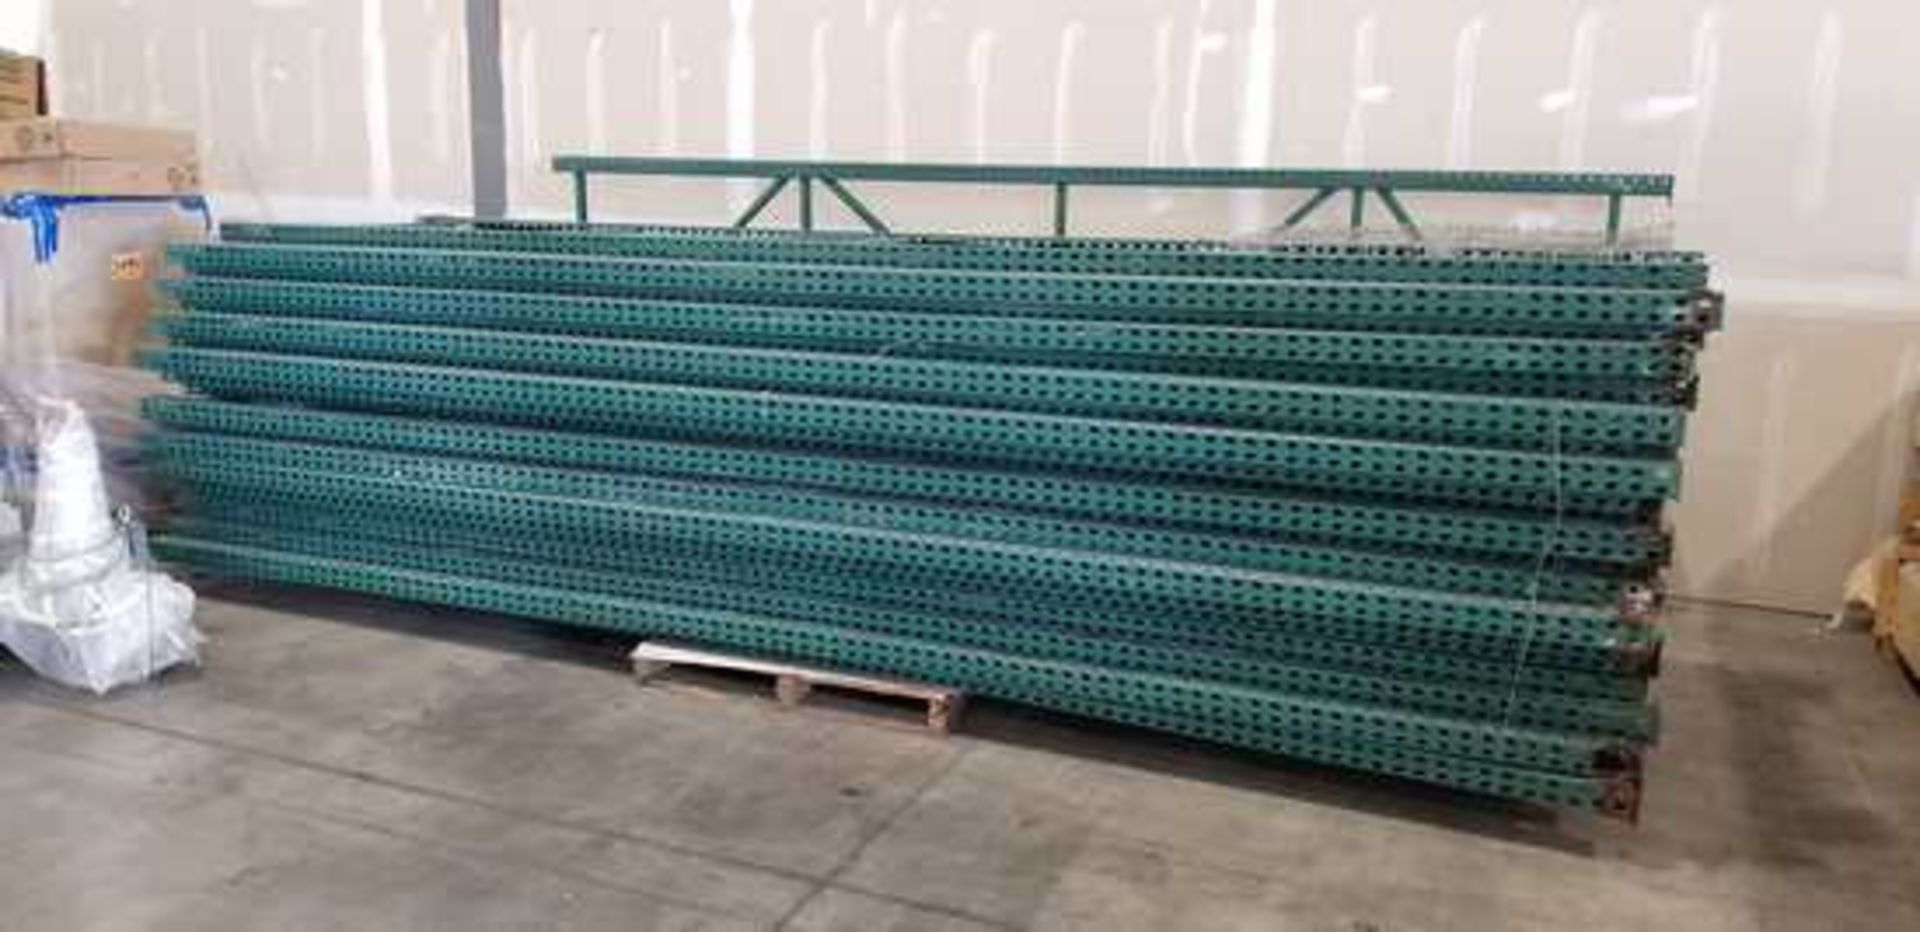 Lot of Pallet Racking including 36 uprights, ~150 Screens & ~42 Cross braces.